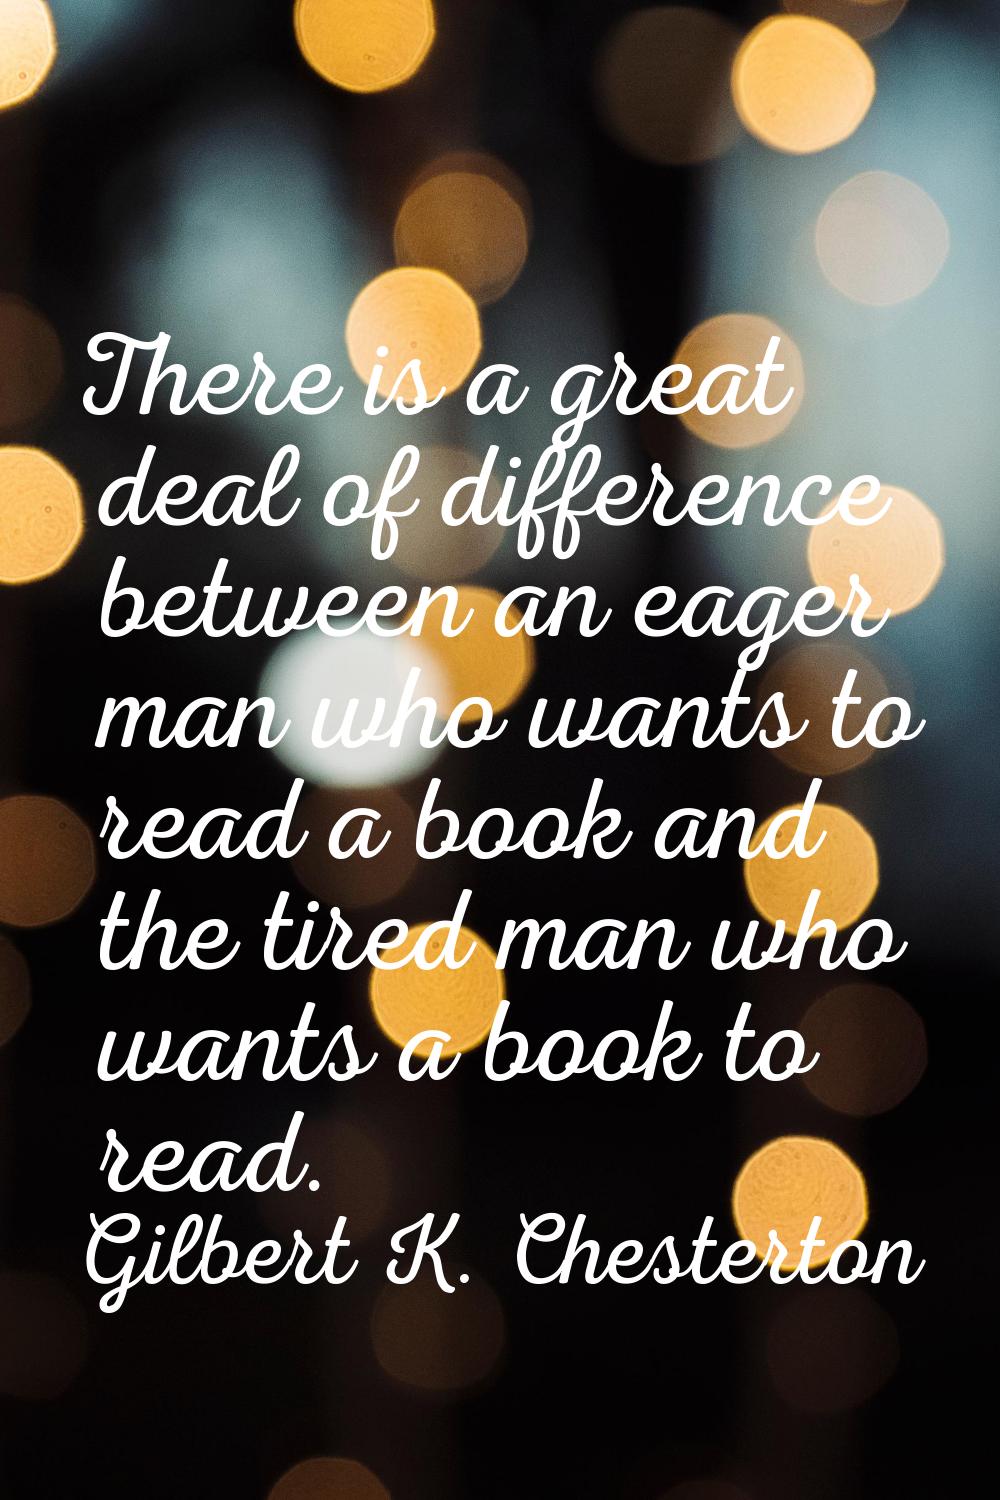 There is a great deal of difference between an eager man who wants to read a book and the tired man